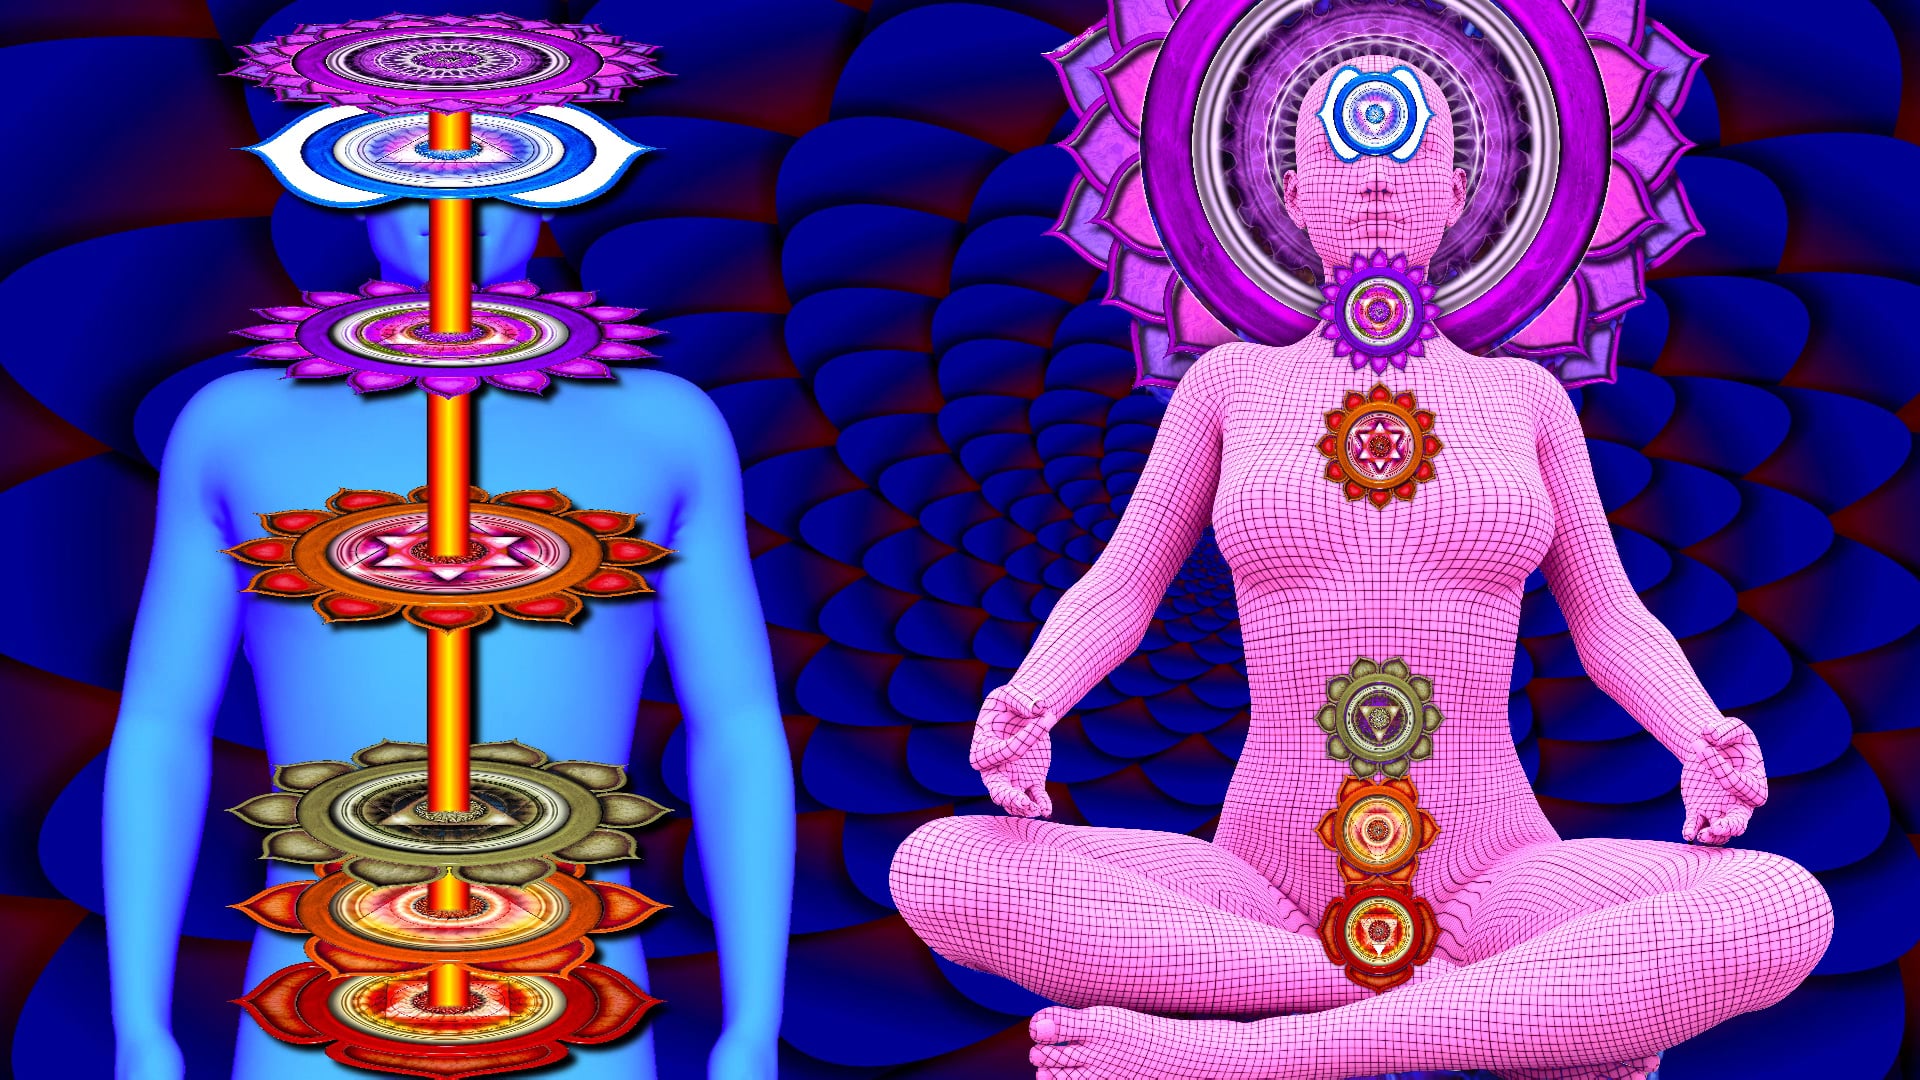 Kundalini Yoga As Envisioned By The Ancient Yogis - Illustration , HD Wallpaper & Backgrounds